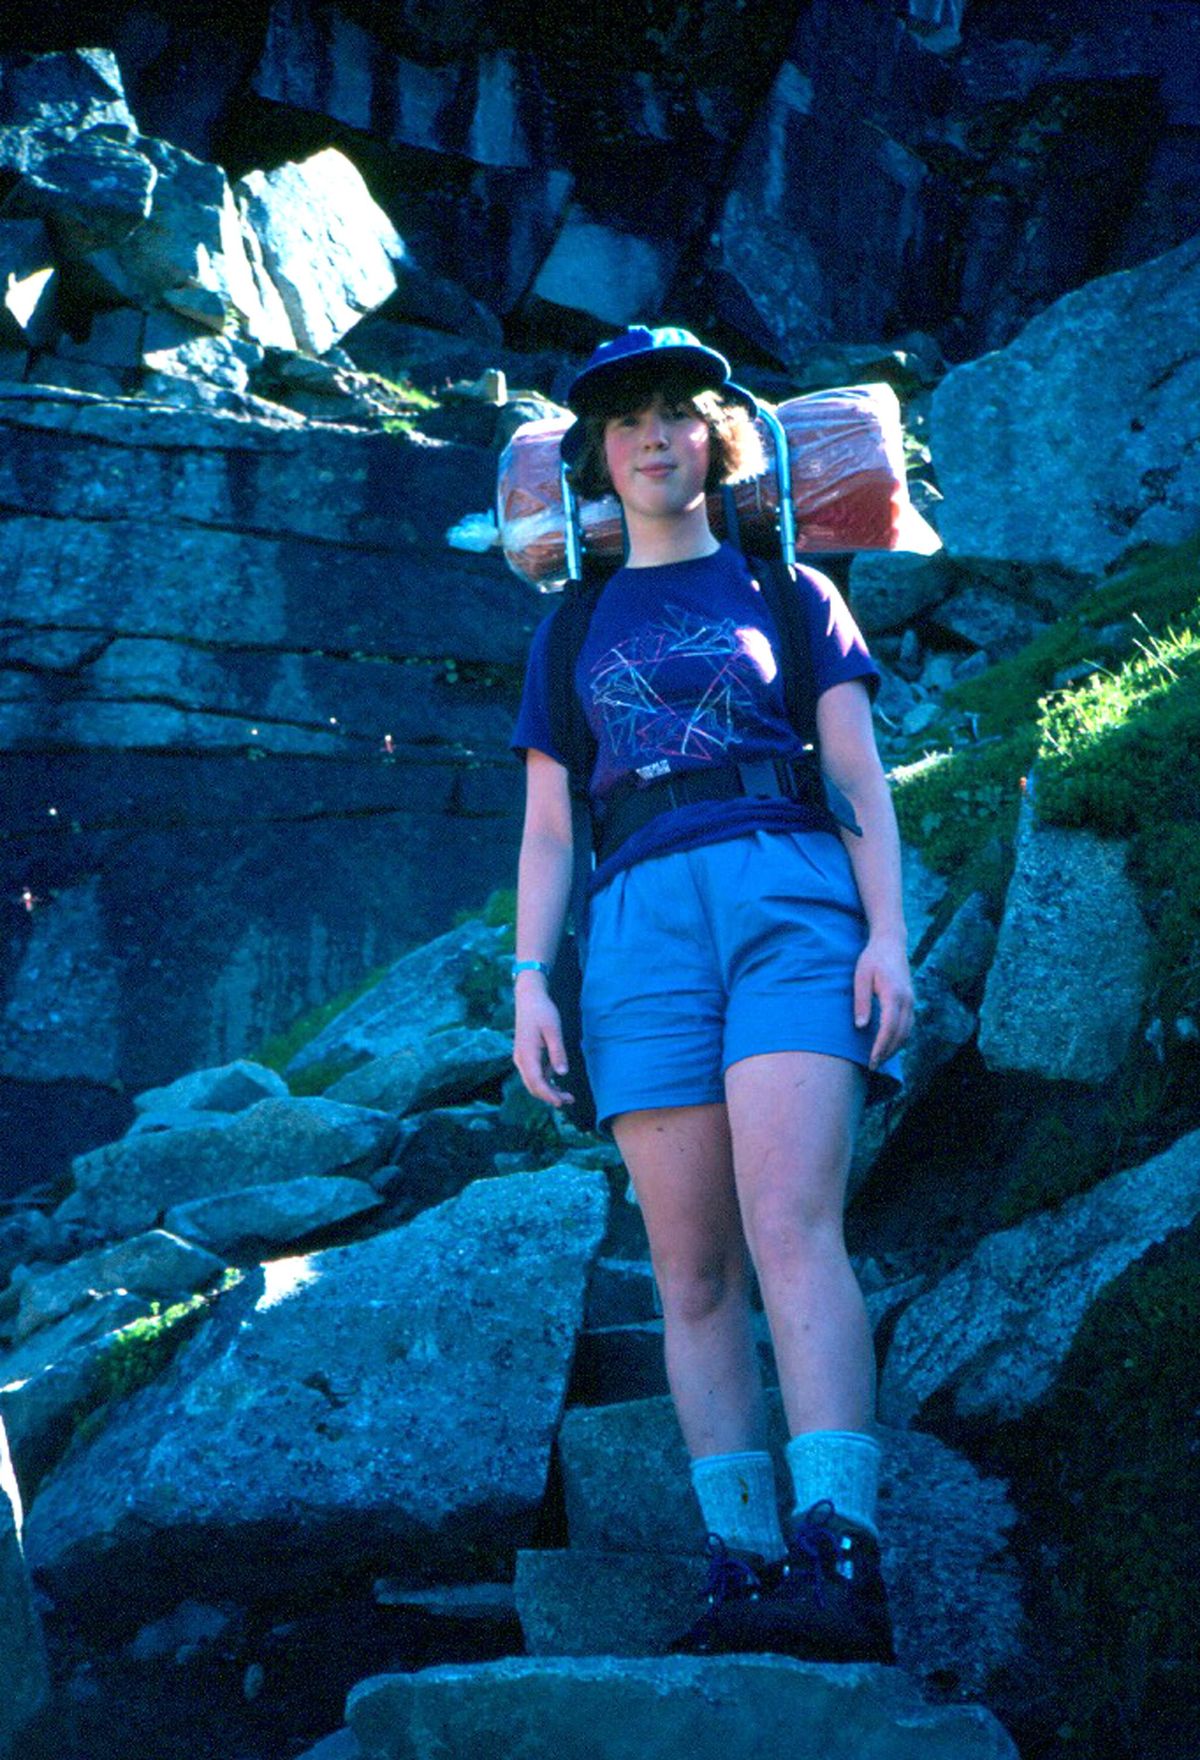 Kimberly Lusk, age 13, hiking near Cloudy Pass on the way to Holden Village in 1986. The 32-mile route starts along the Suiattle River near Darrington. (Lusk family photo)